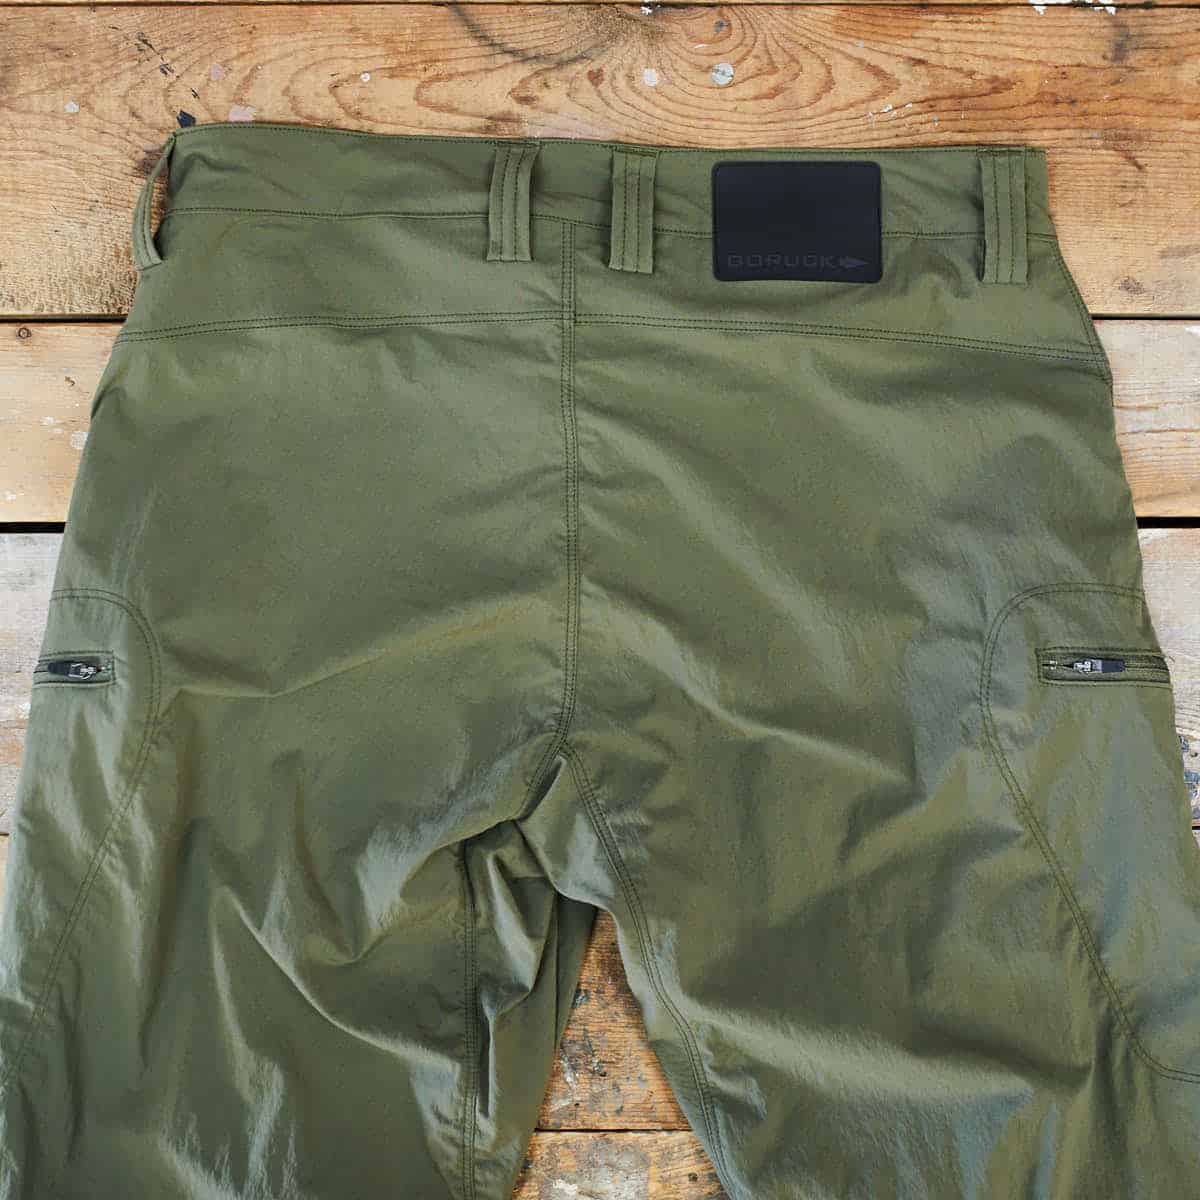 Challenge Pants from GORUCK Review - Cross Train Clothes